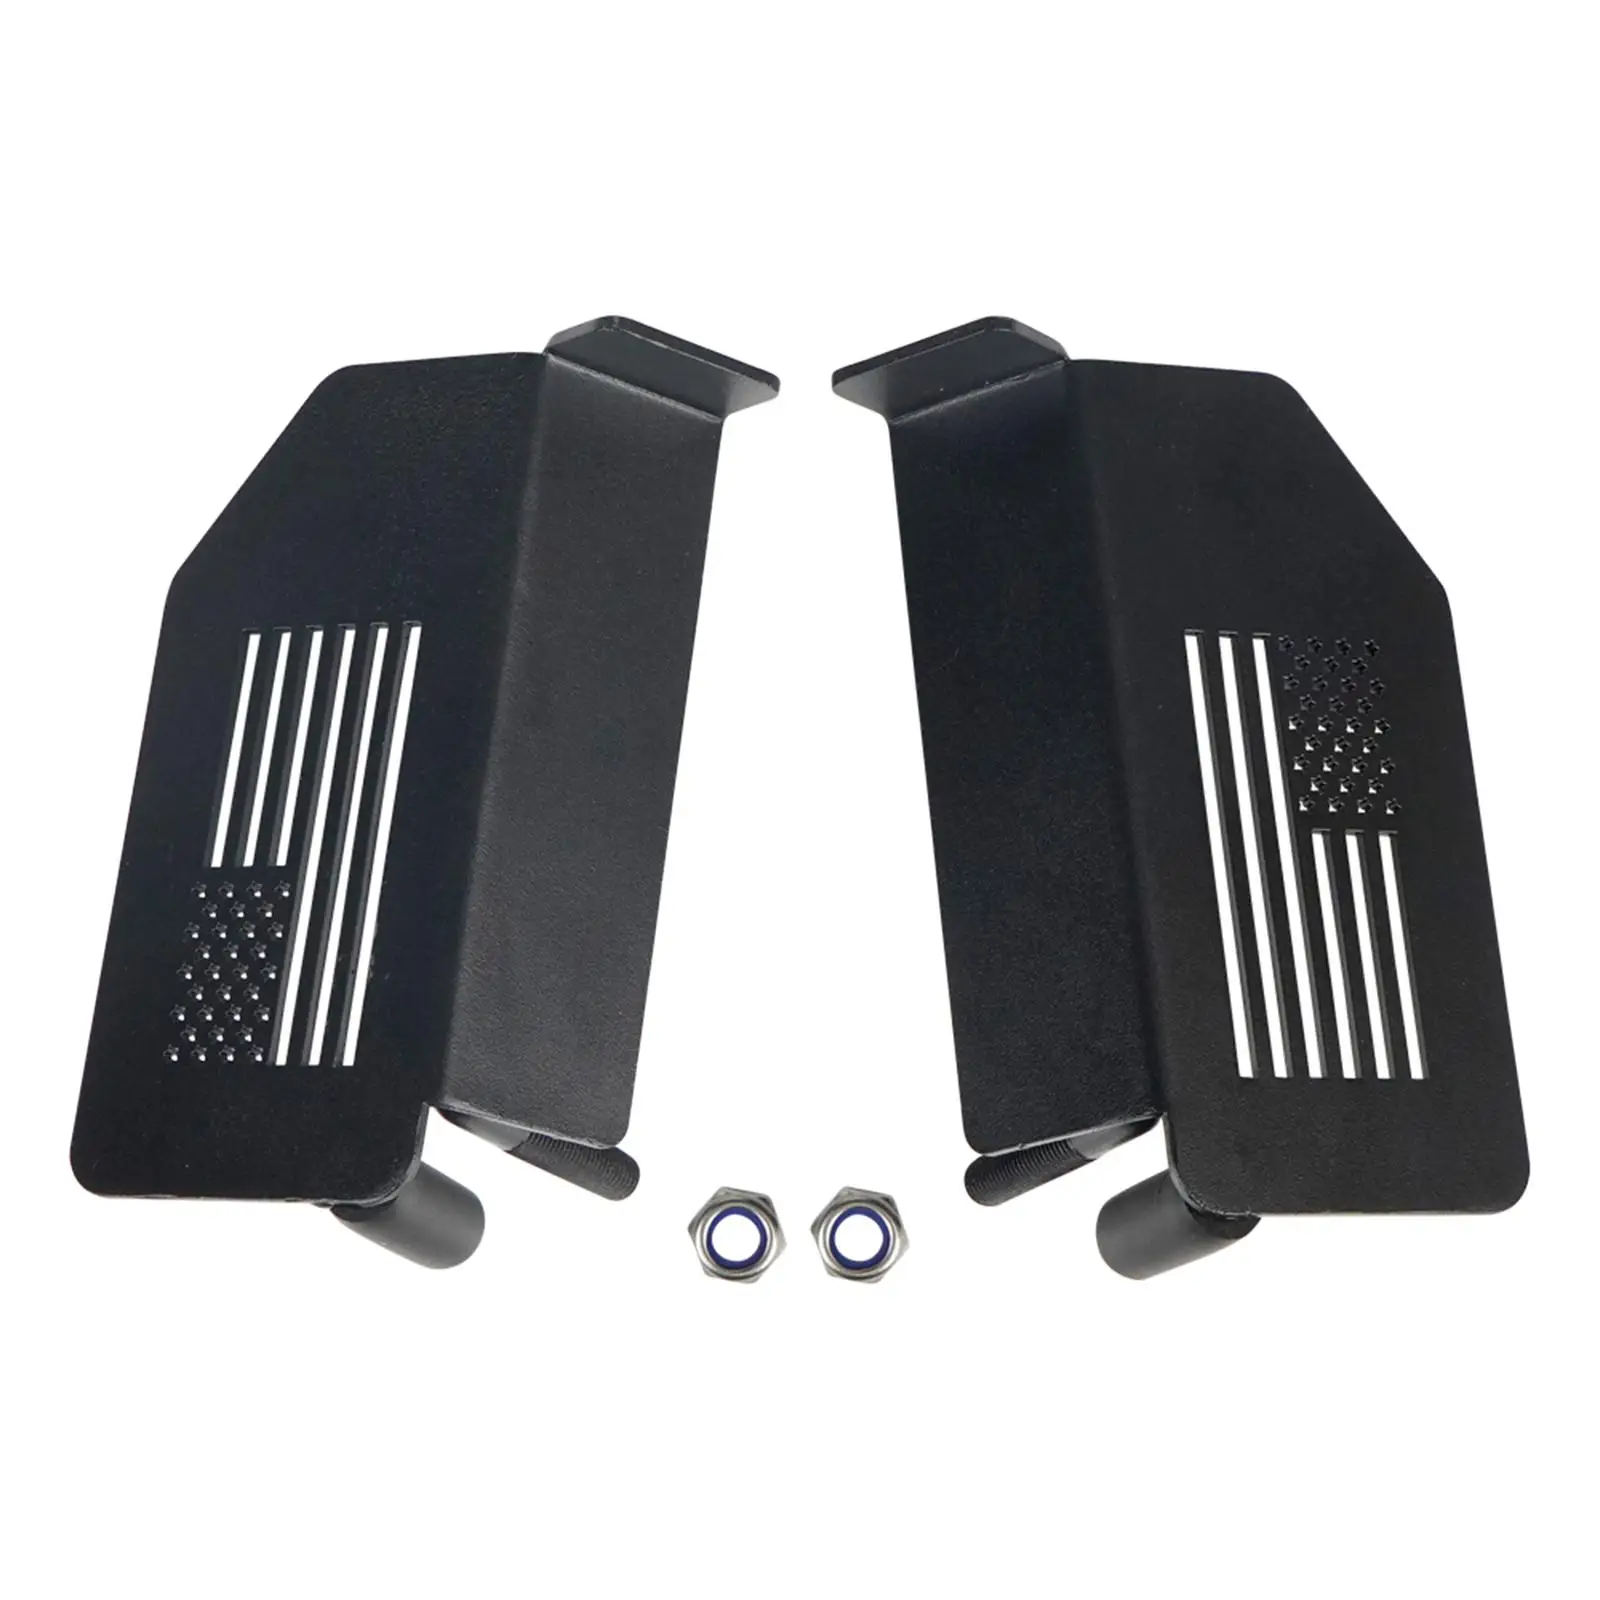 2x Door Off Foot Pegs Foot Rest Easy to Install Heavy Duty Metal with US Flag Anti Slip 120°Angle for JK JL Jt